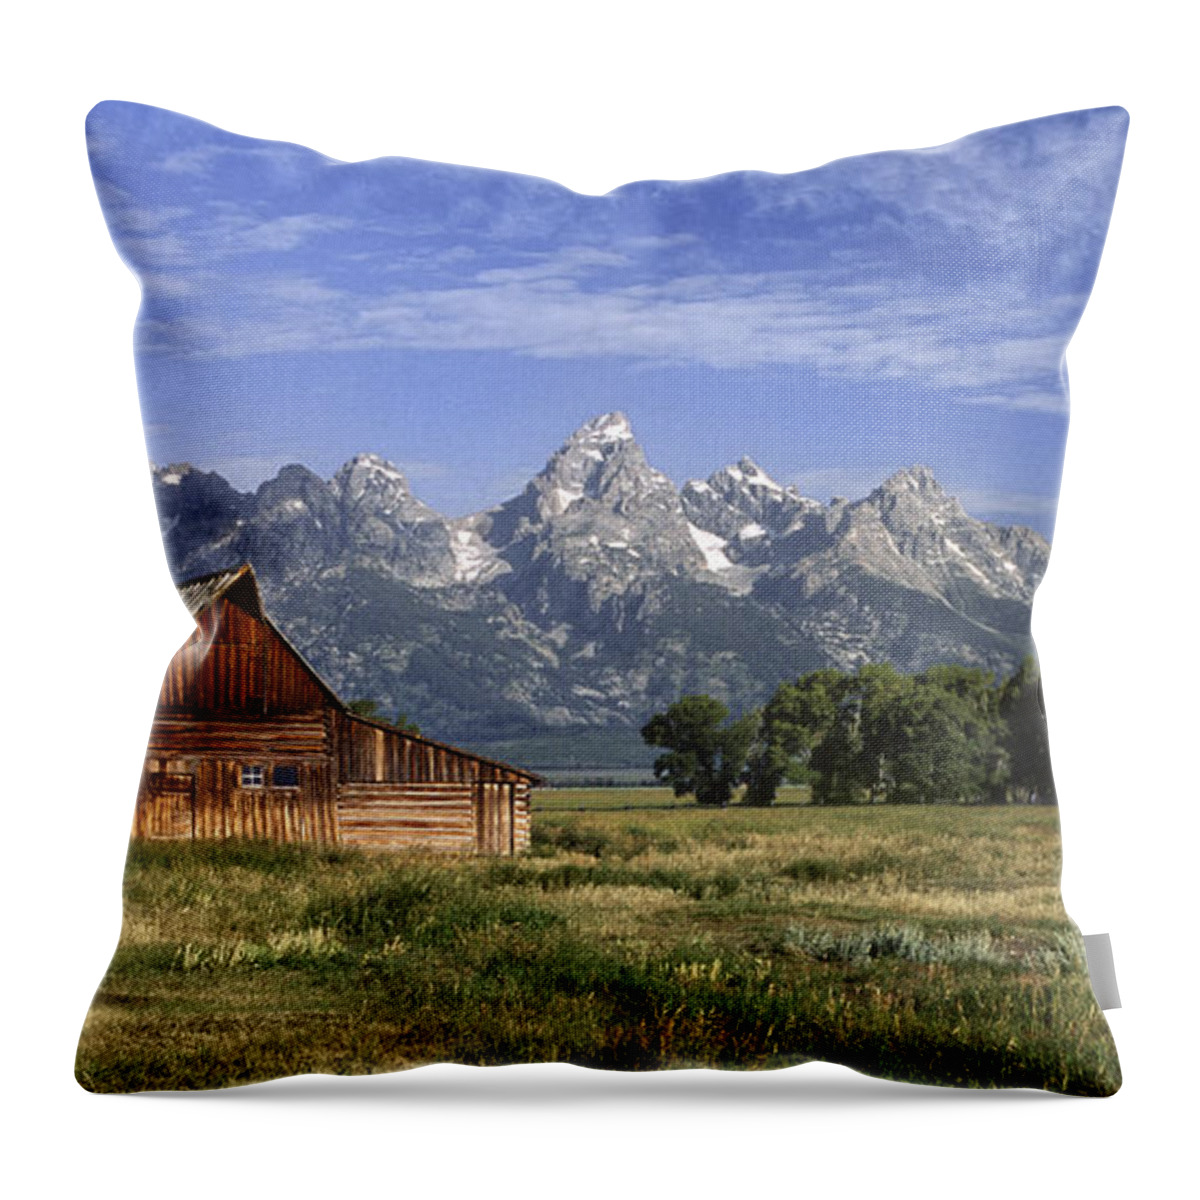 Grand Teton Throw Pillow featuring the photograph Moulton Barn In The Tetons by Sandra Bronstein